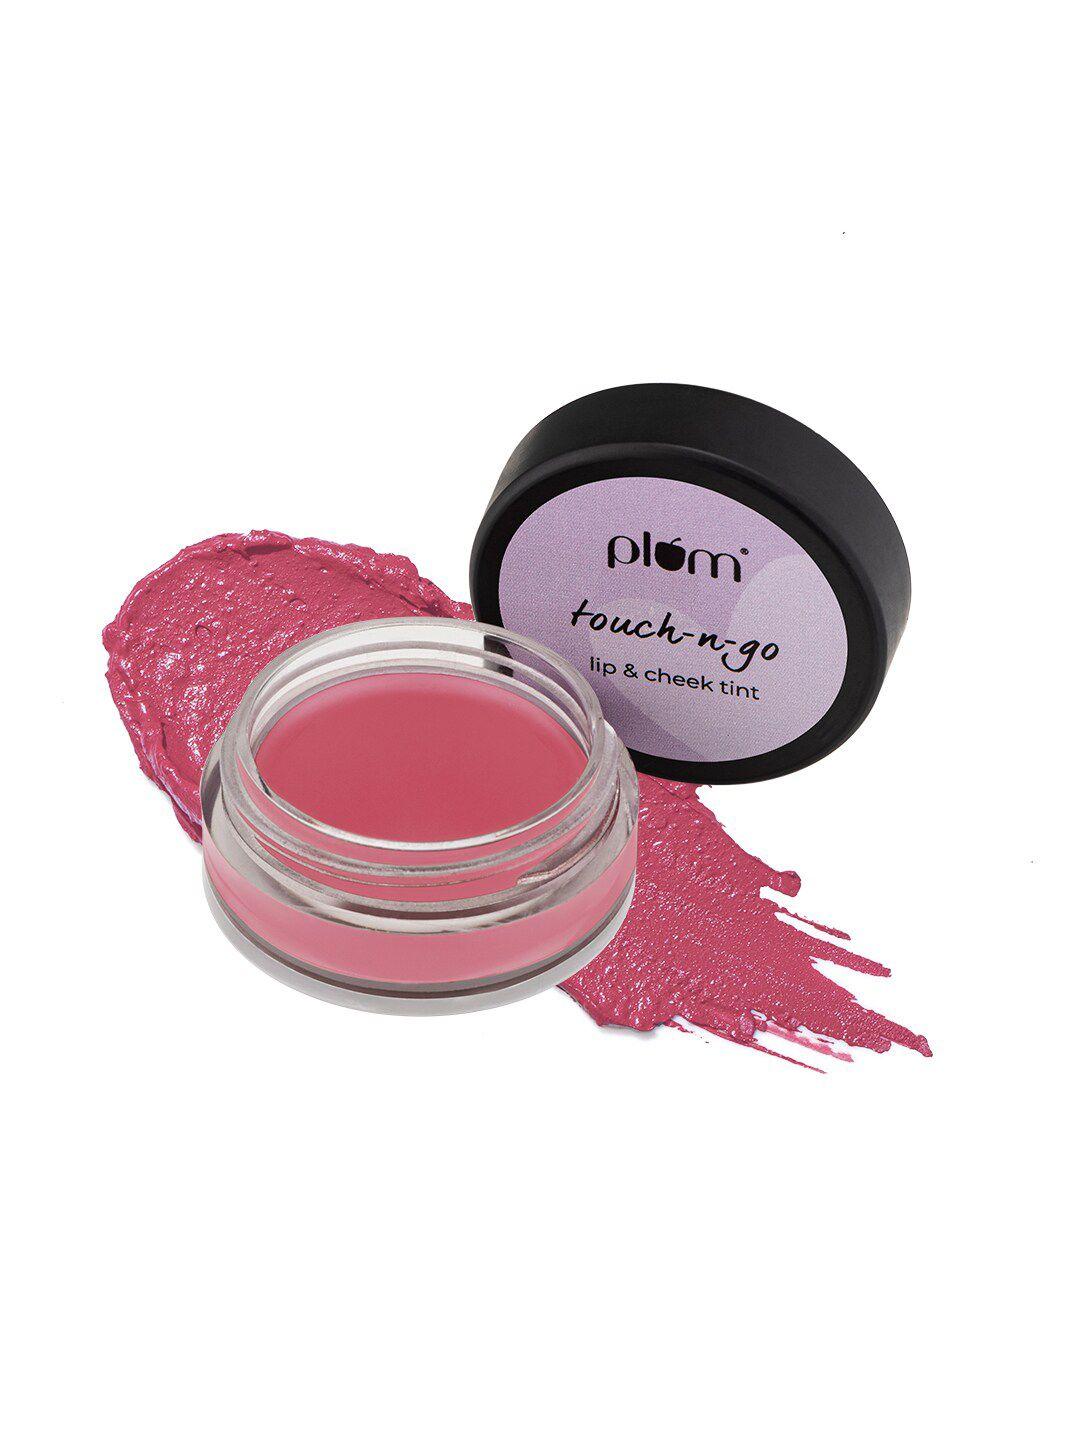 plum highly pigmented touch-n-go lip & cheek tint, 5g - tickled pink 124